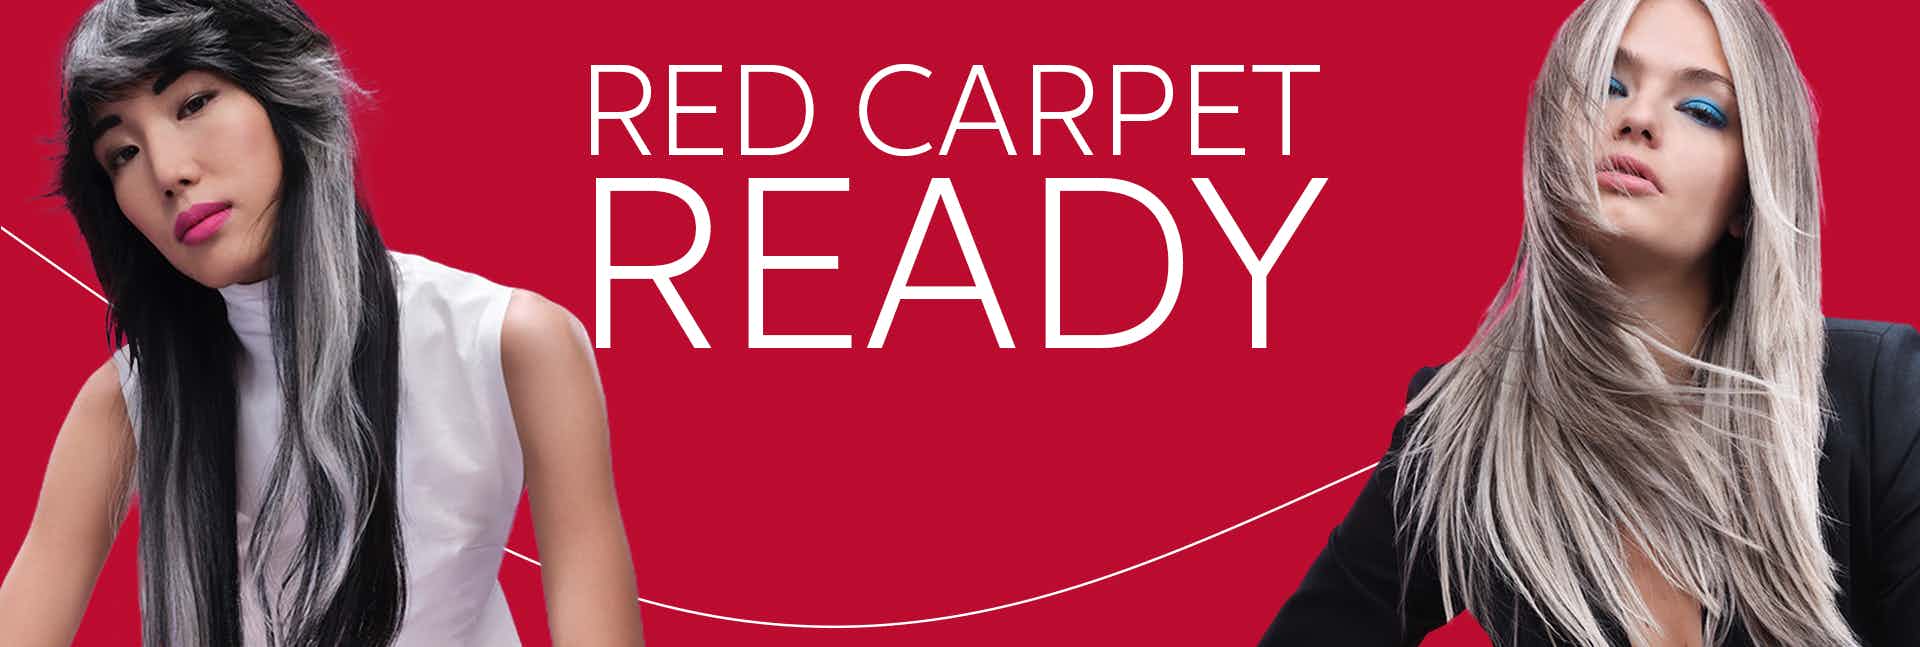 Awards season is here, so Wella Professionals reveal the secrets behind your favorite red carpet looks. 